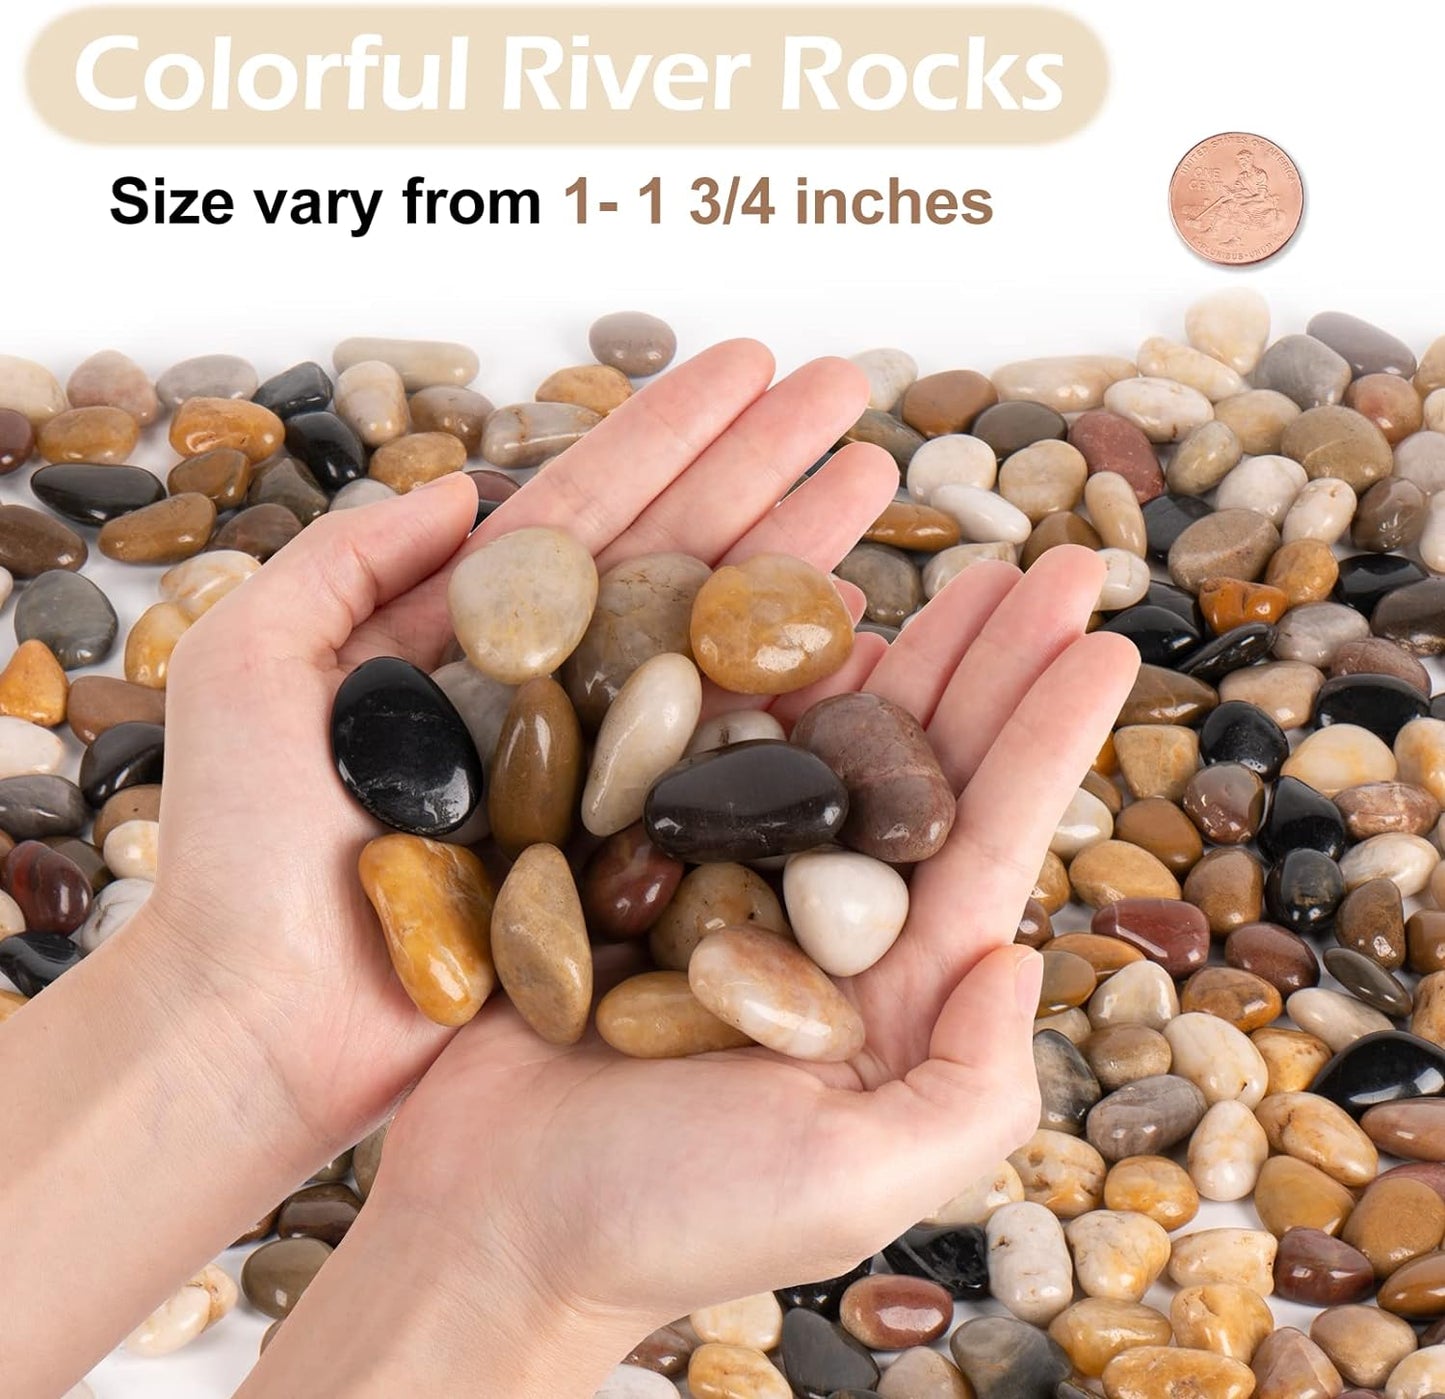 15Lb Decorative Rocks for Plants and Garden Landscaping, Polished River Stone for Outdoor Decor, 1-1 3/4 Inch